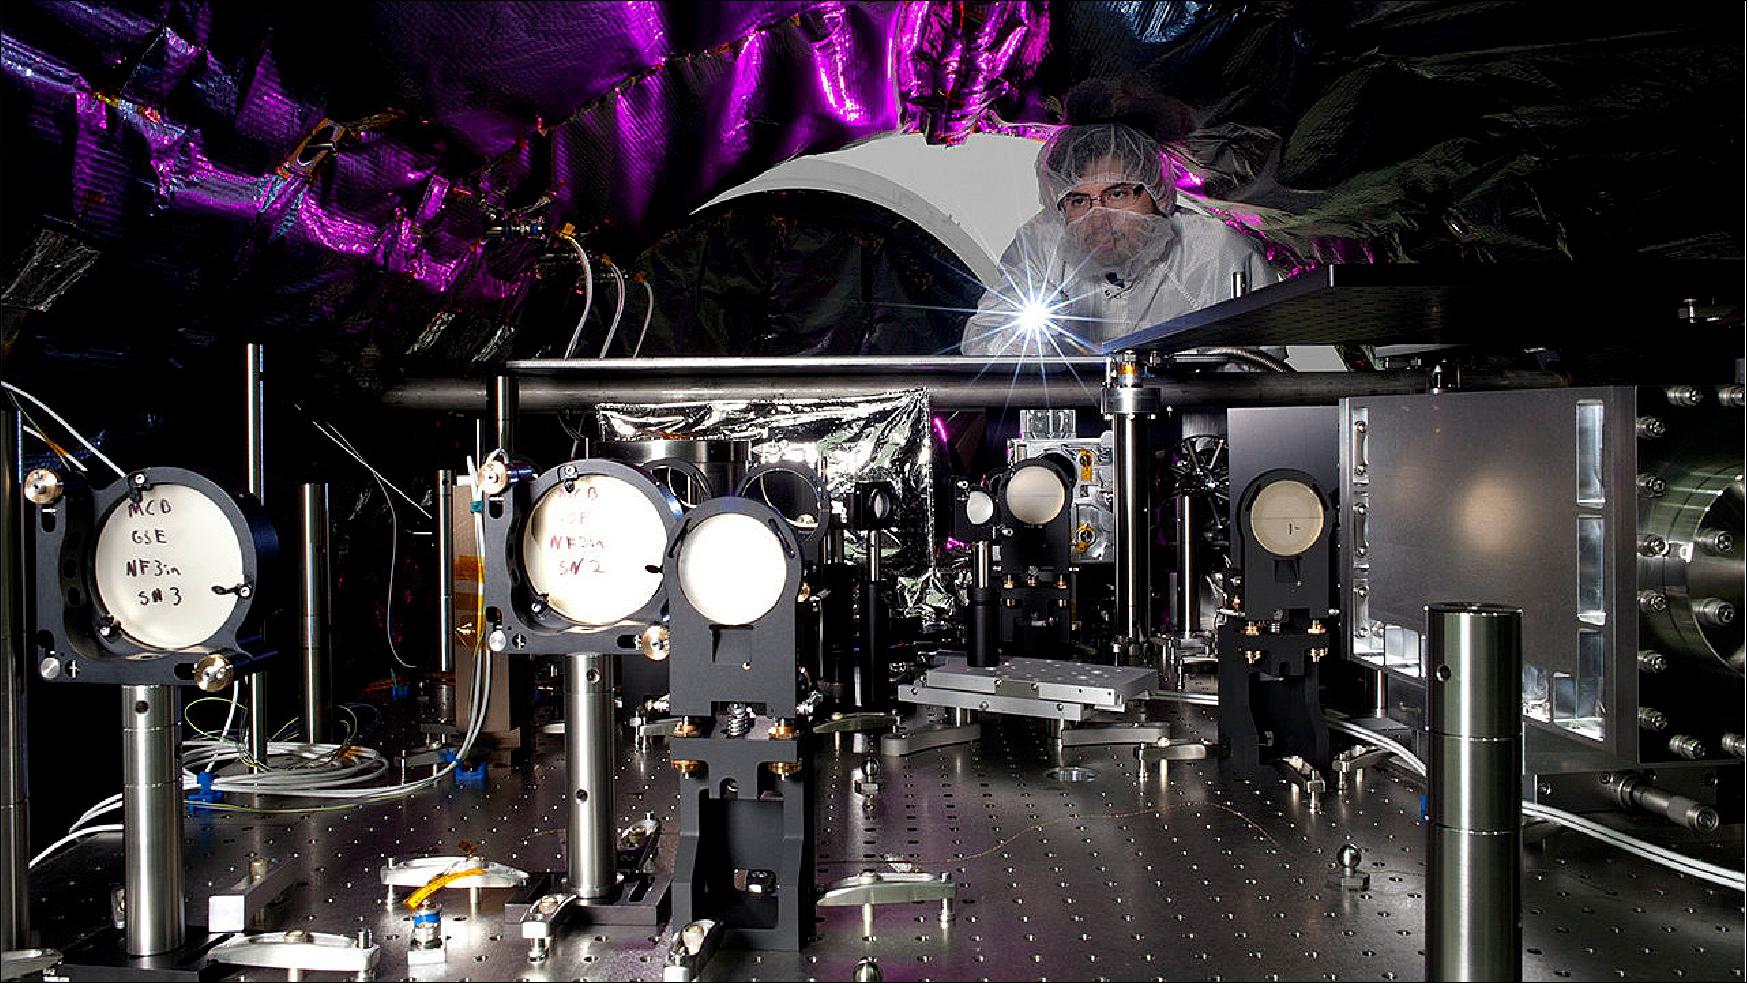 Figure 38: An optical engineer at NASA's Jet Propulsion Laboratory, in Pasadena, California, Camilo Mejia Prada, shines a light on the interior of a testbed for an instrument called a coronagraph that will fly aboard the WFIRST space telescope (image credit: NASA/JPL-Caltech/Matthew Luem)